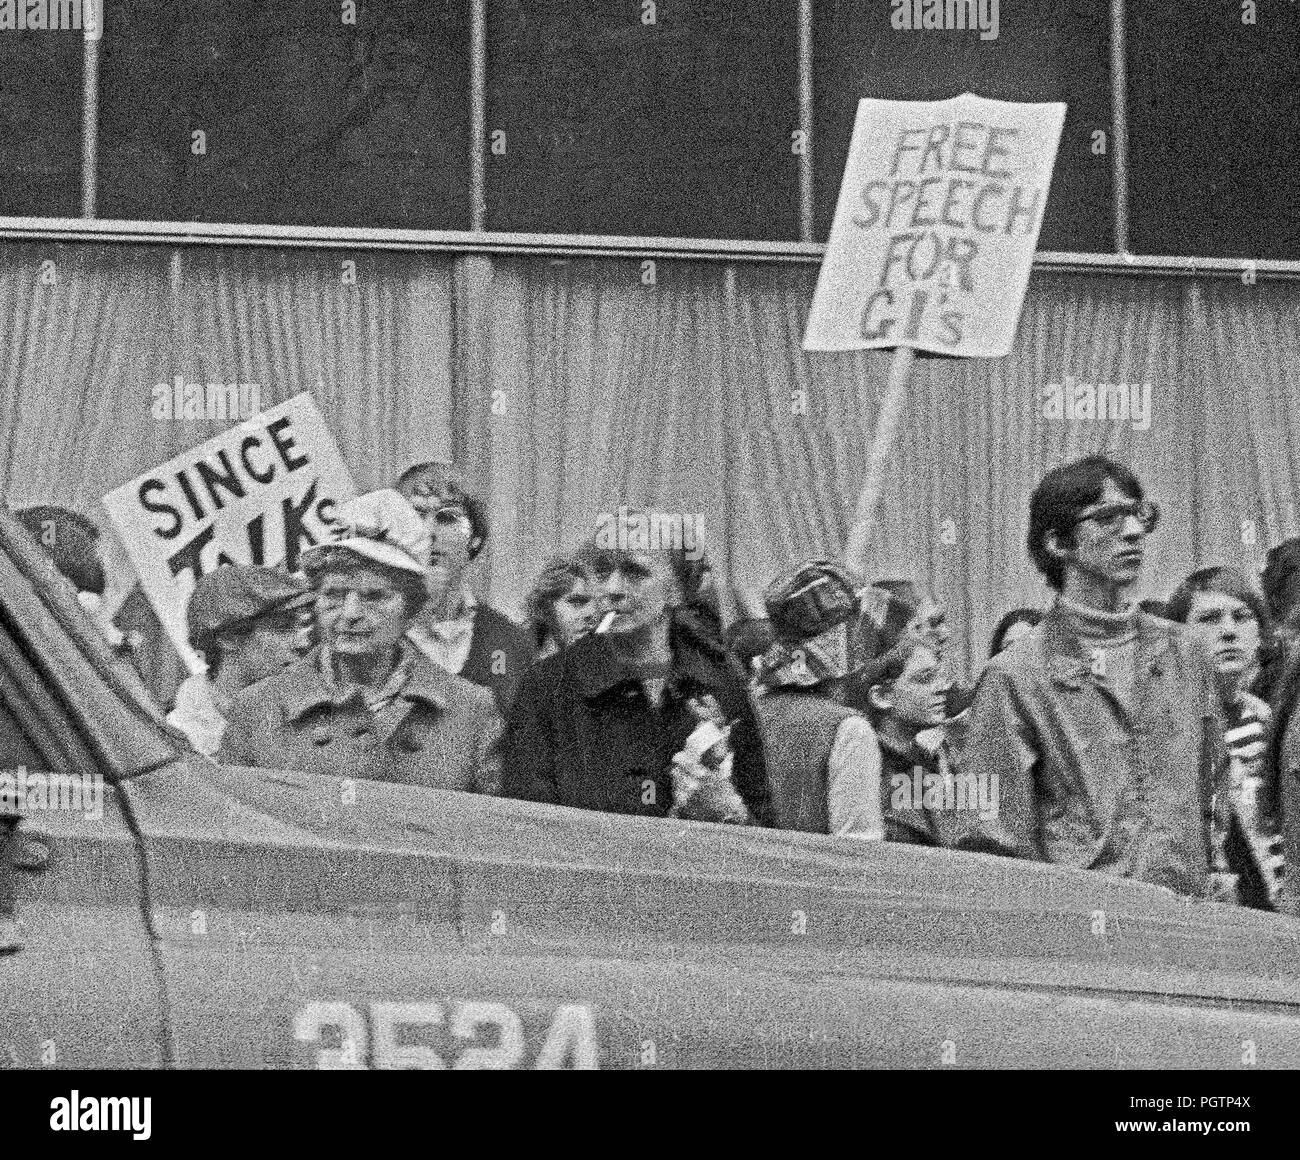 onlookers and free speech for Gis signs at a New York city protest of the Vietnam War, late 1960s Stock Photo